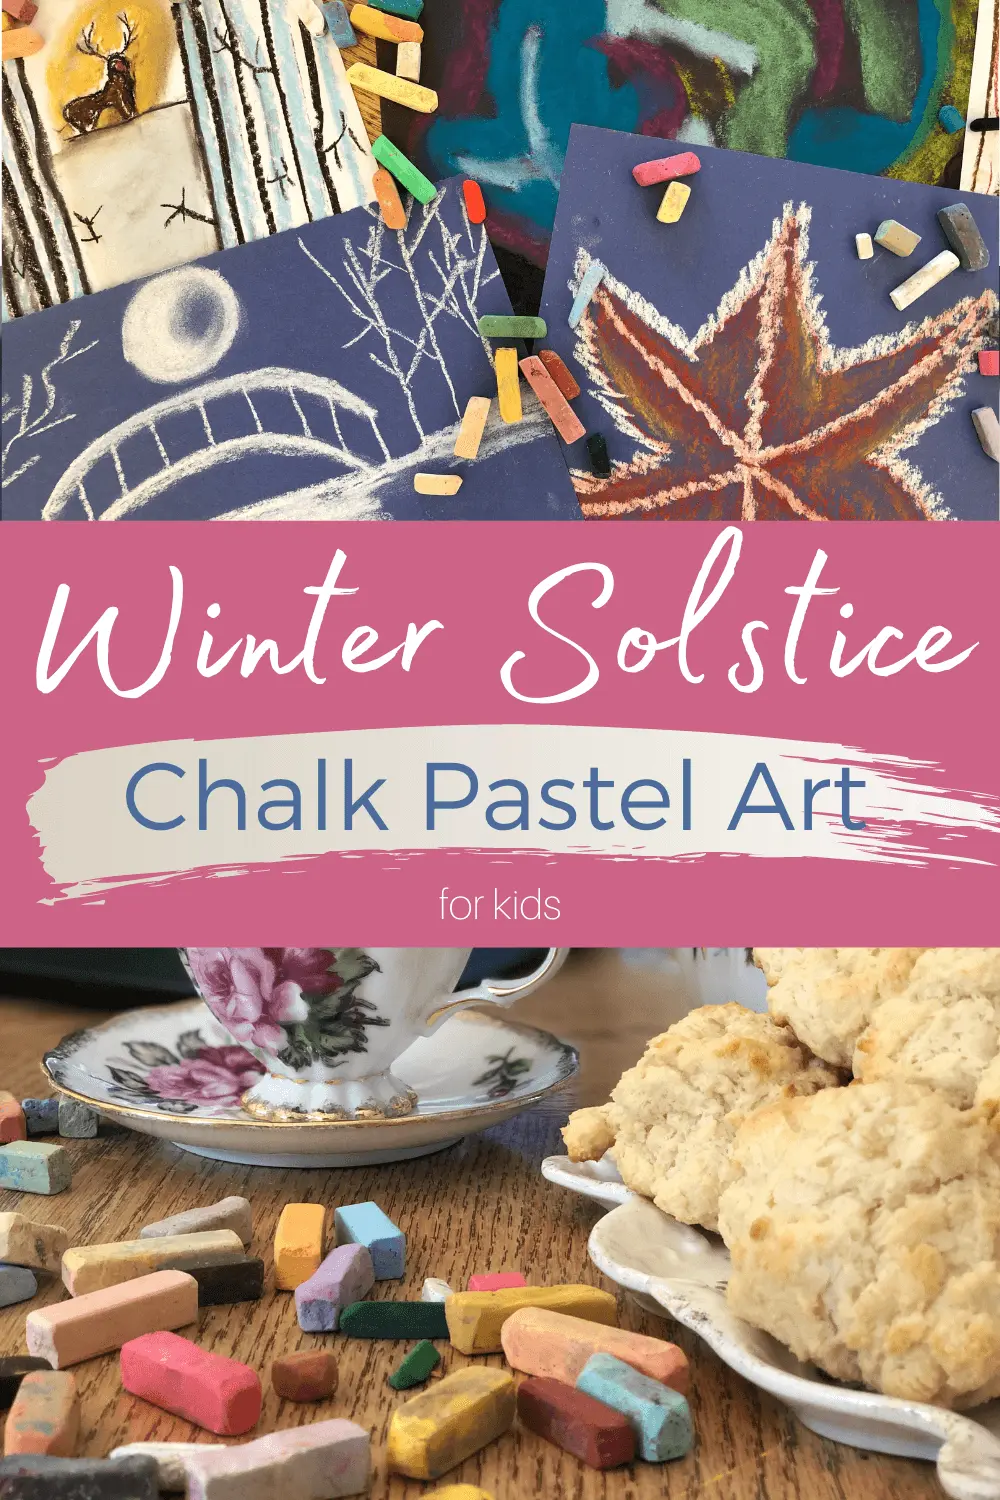 Winter Solstice Chalk Pastel Art: Kids will love making winter solstice chalk pastel art with the You ARE An Artist clubhouse. Chalk pastels are perfect for any age and celebrating the winter solstice just got easier! #YouAREAnArtist #chalkpastels #wintersolstice #winterart #artforkids #wintersolsticeart 